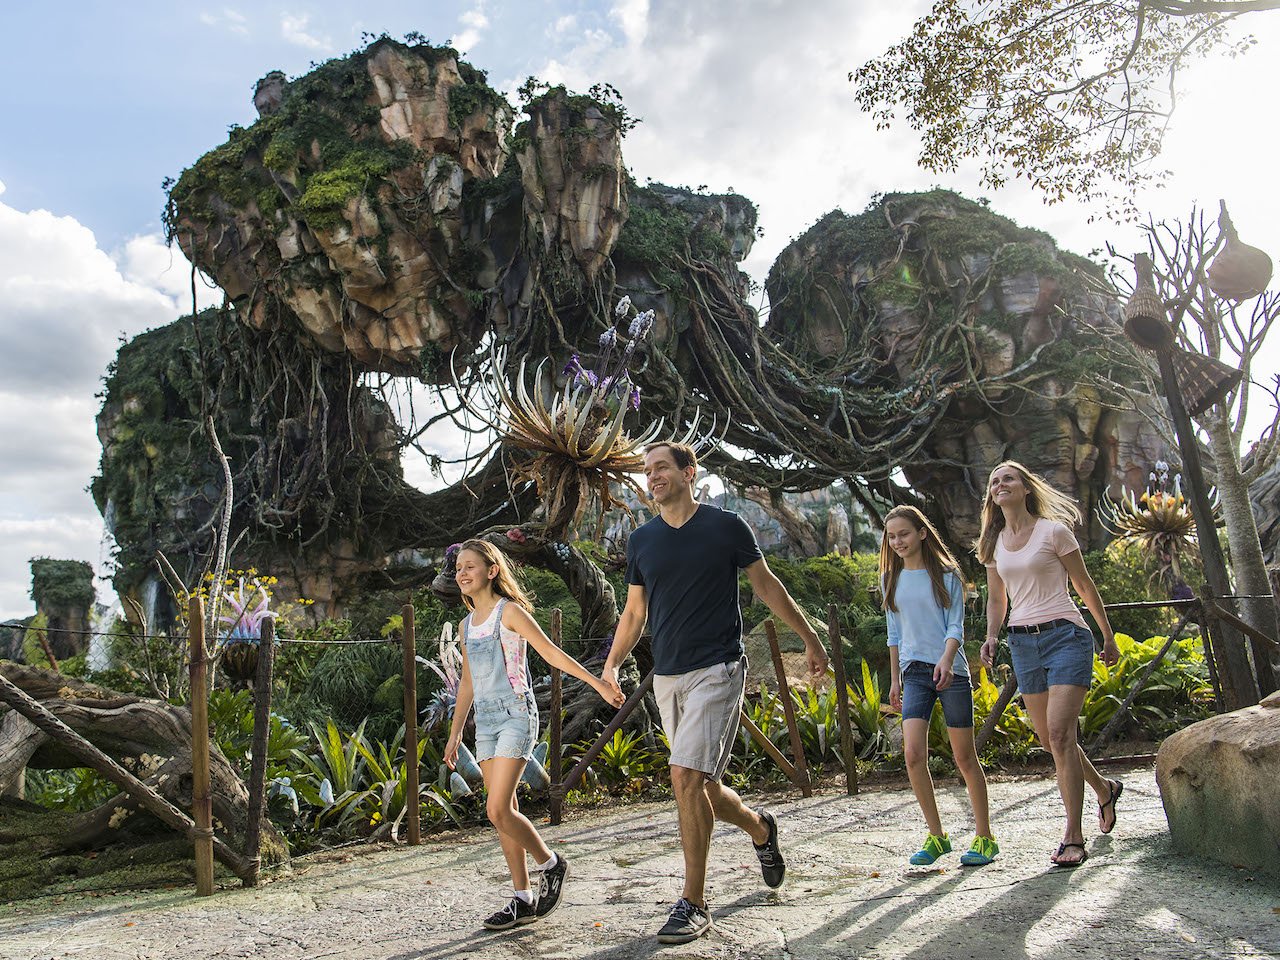 Floating mountains grace the sky while exotic plants fill the colorful landscape inside Pandora - The World of AVATAR, opening May 27, 2017, at Disney's Animal Kingdom. Pandora - The World of AVATAR will bring a variety of new experiences to the park, including a family-friendly attraction called Na'vi River Journey and new food & beverage and merchandise locations. Disney's Animal Kingdom is one of four theme parks at Walt Disney World Resort in Lake Buena Vista, Fla. 